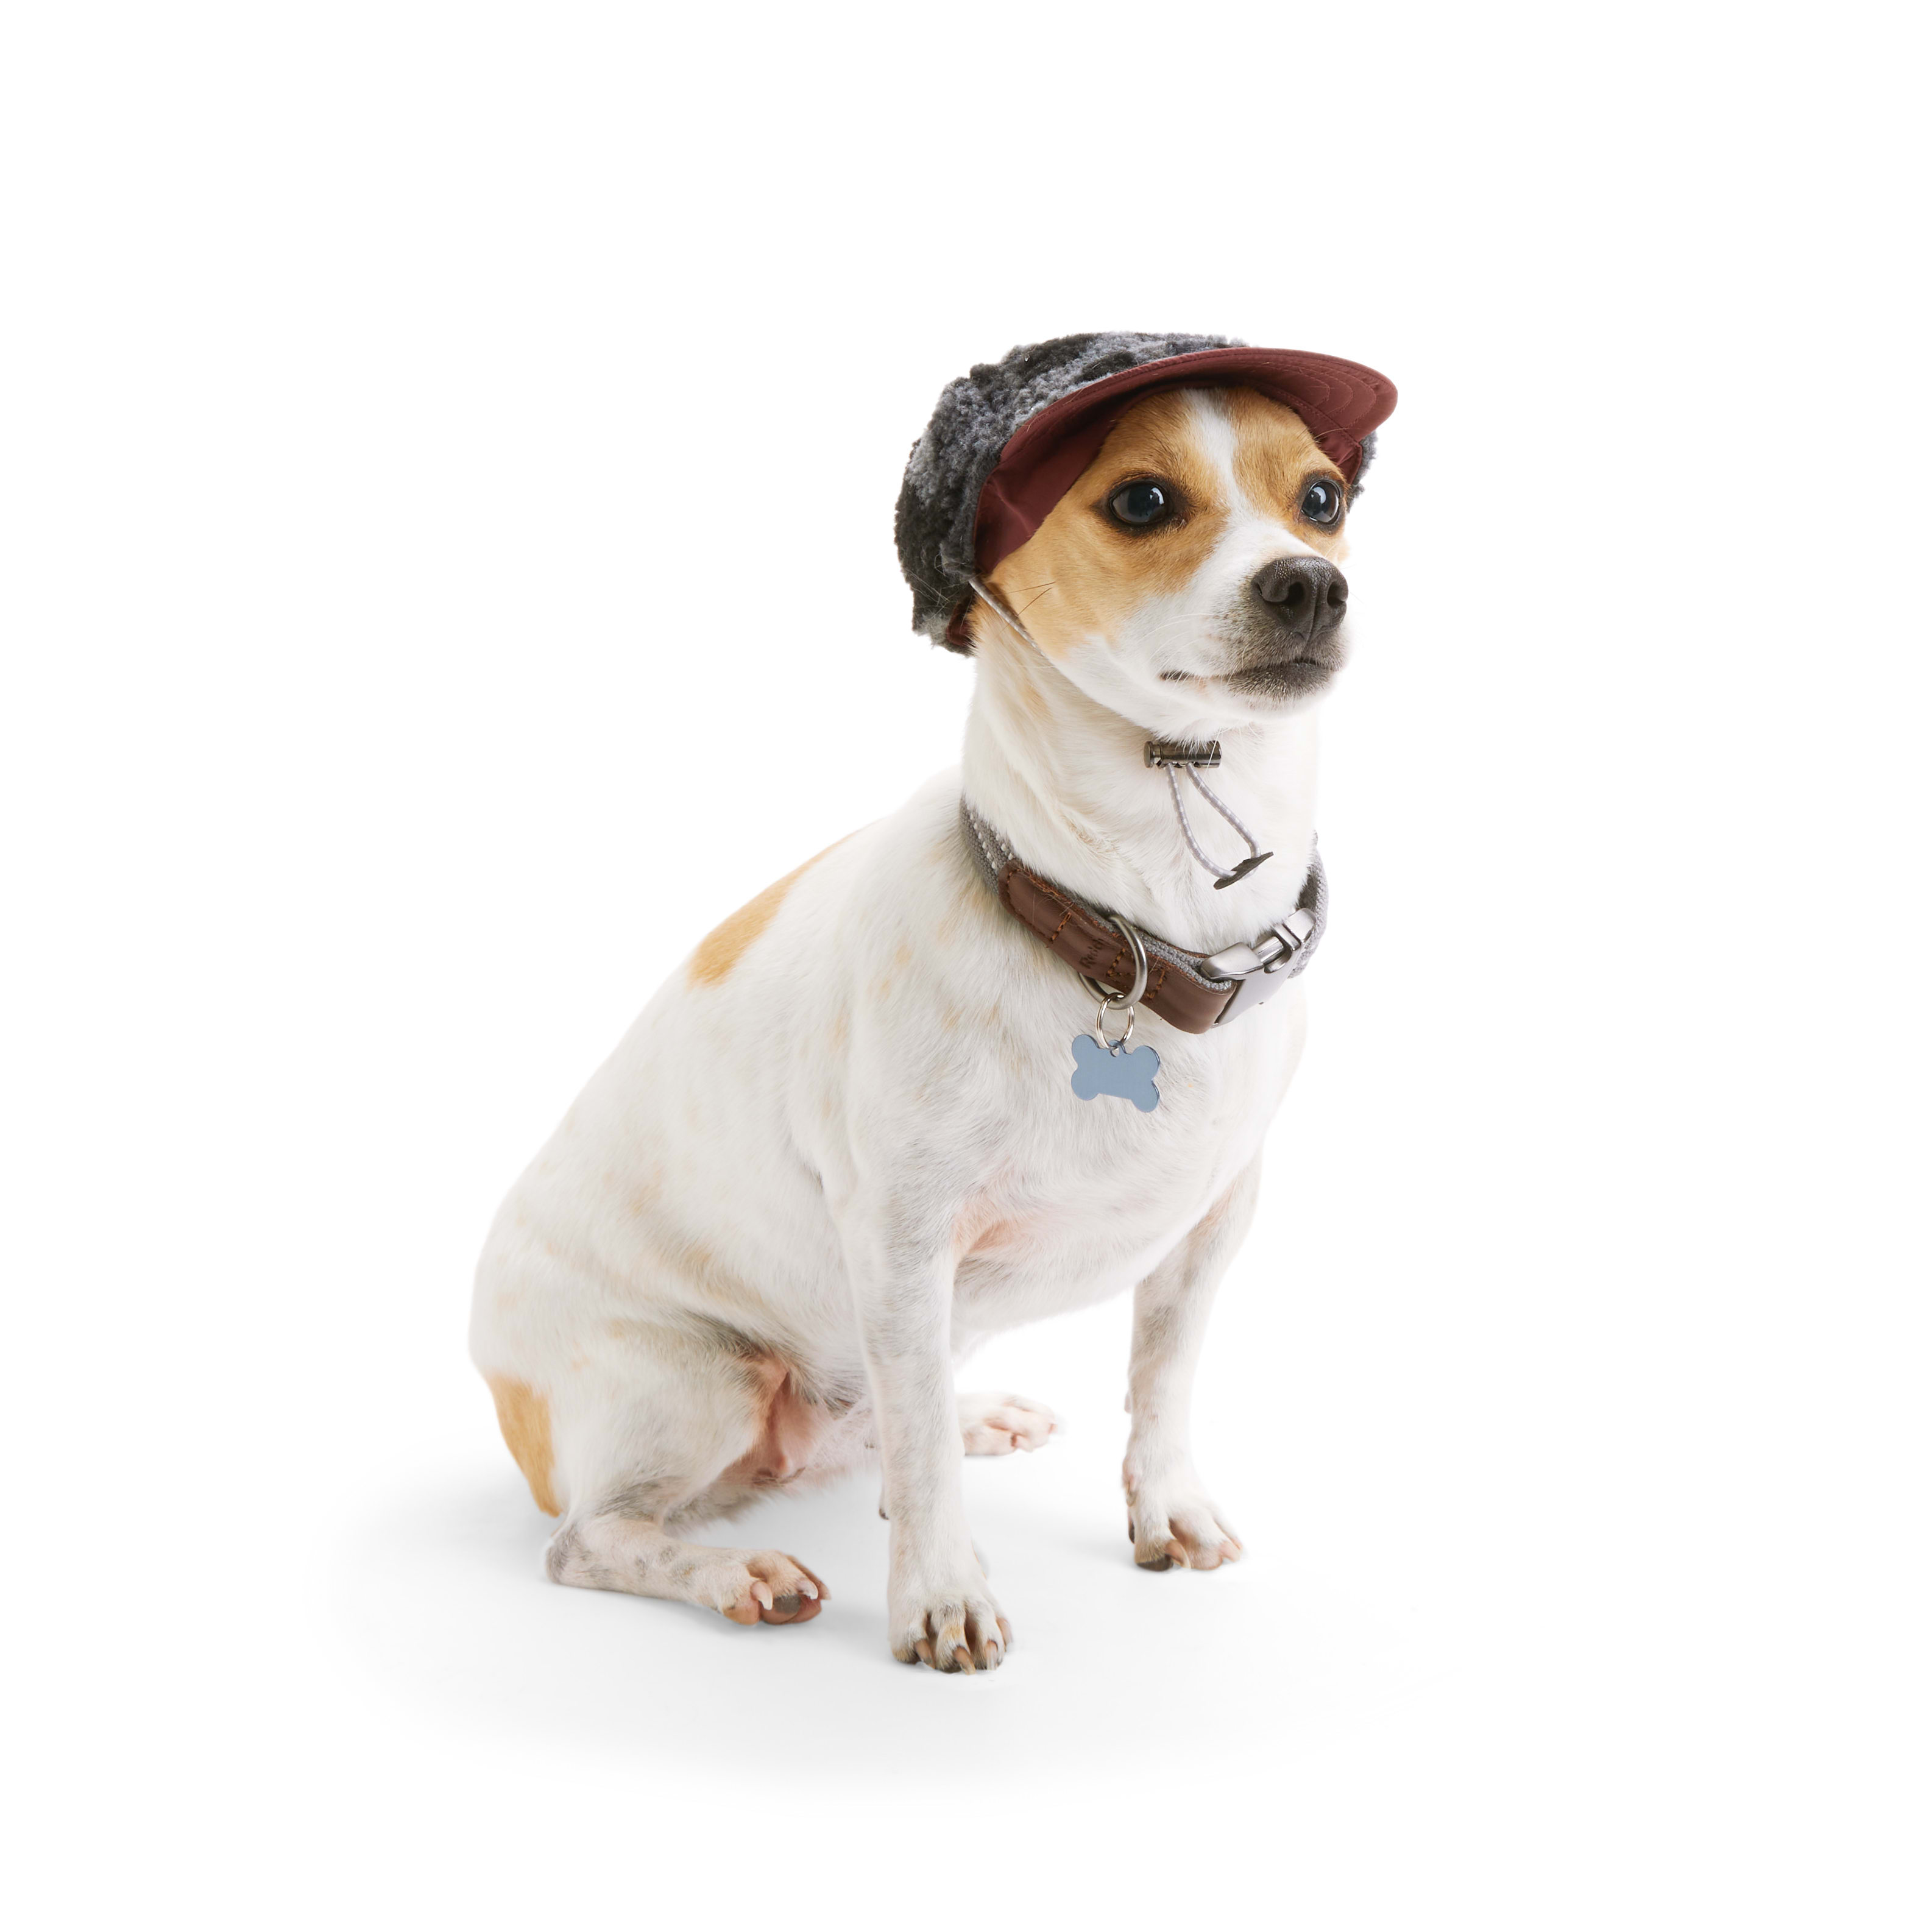 Dog Baseball Caps Are the Fashion Accessory Your Pup Needs This Summer